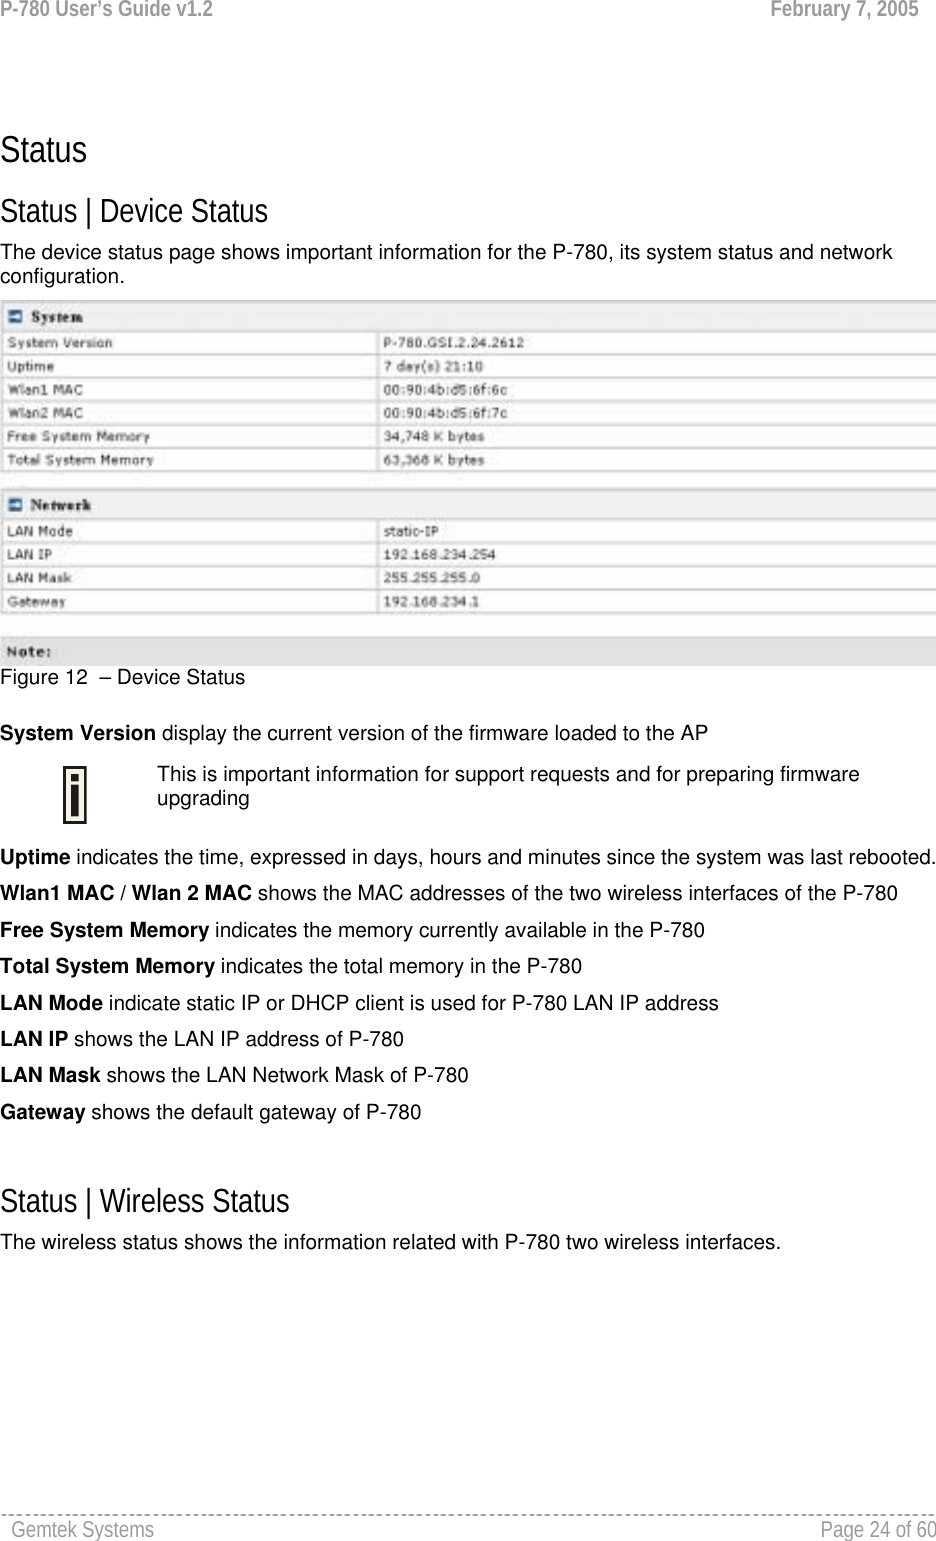 P-780 User’s Guide v1.2  February 7, 2005 Gemtek Systems    Page 24 of 60    Status Status | Device Status The device status page shows important information for the P-780, its system status and network configuration.  Figure 12  – Device Status  System Version display the current version of the firmware loaded to the AP  This is important information for support requests and for preparing firmware upgrading Uptime indicates the time, expressed in days, hours and minutes since the system was last rebooted. Wlan1 MAC / Wlan 2 MAC shows the MAC addresses of the two wireless interfaces of the P-780 Free System Memory indicates the memory currently available in the P-780  Total System Memory indicates the total memory in the P-780  LAN Mode indicate static IP or DHCP client is used for P-780 LAN IP address LAN IP shows the LAN IP address of P-780 LAN Mask shows the LAN Network Mask of P-780 Gateway shows the default gateway of P-780  Status | Wireless Status The wireless status shows the information related with P-780 two wireless interfaces. 